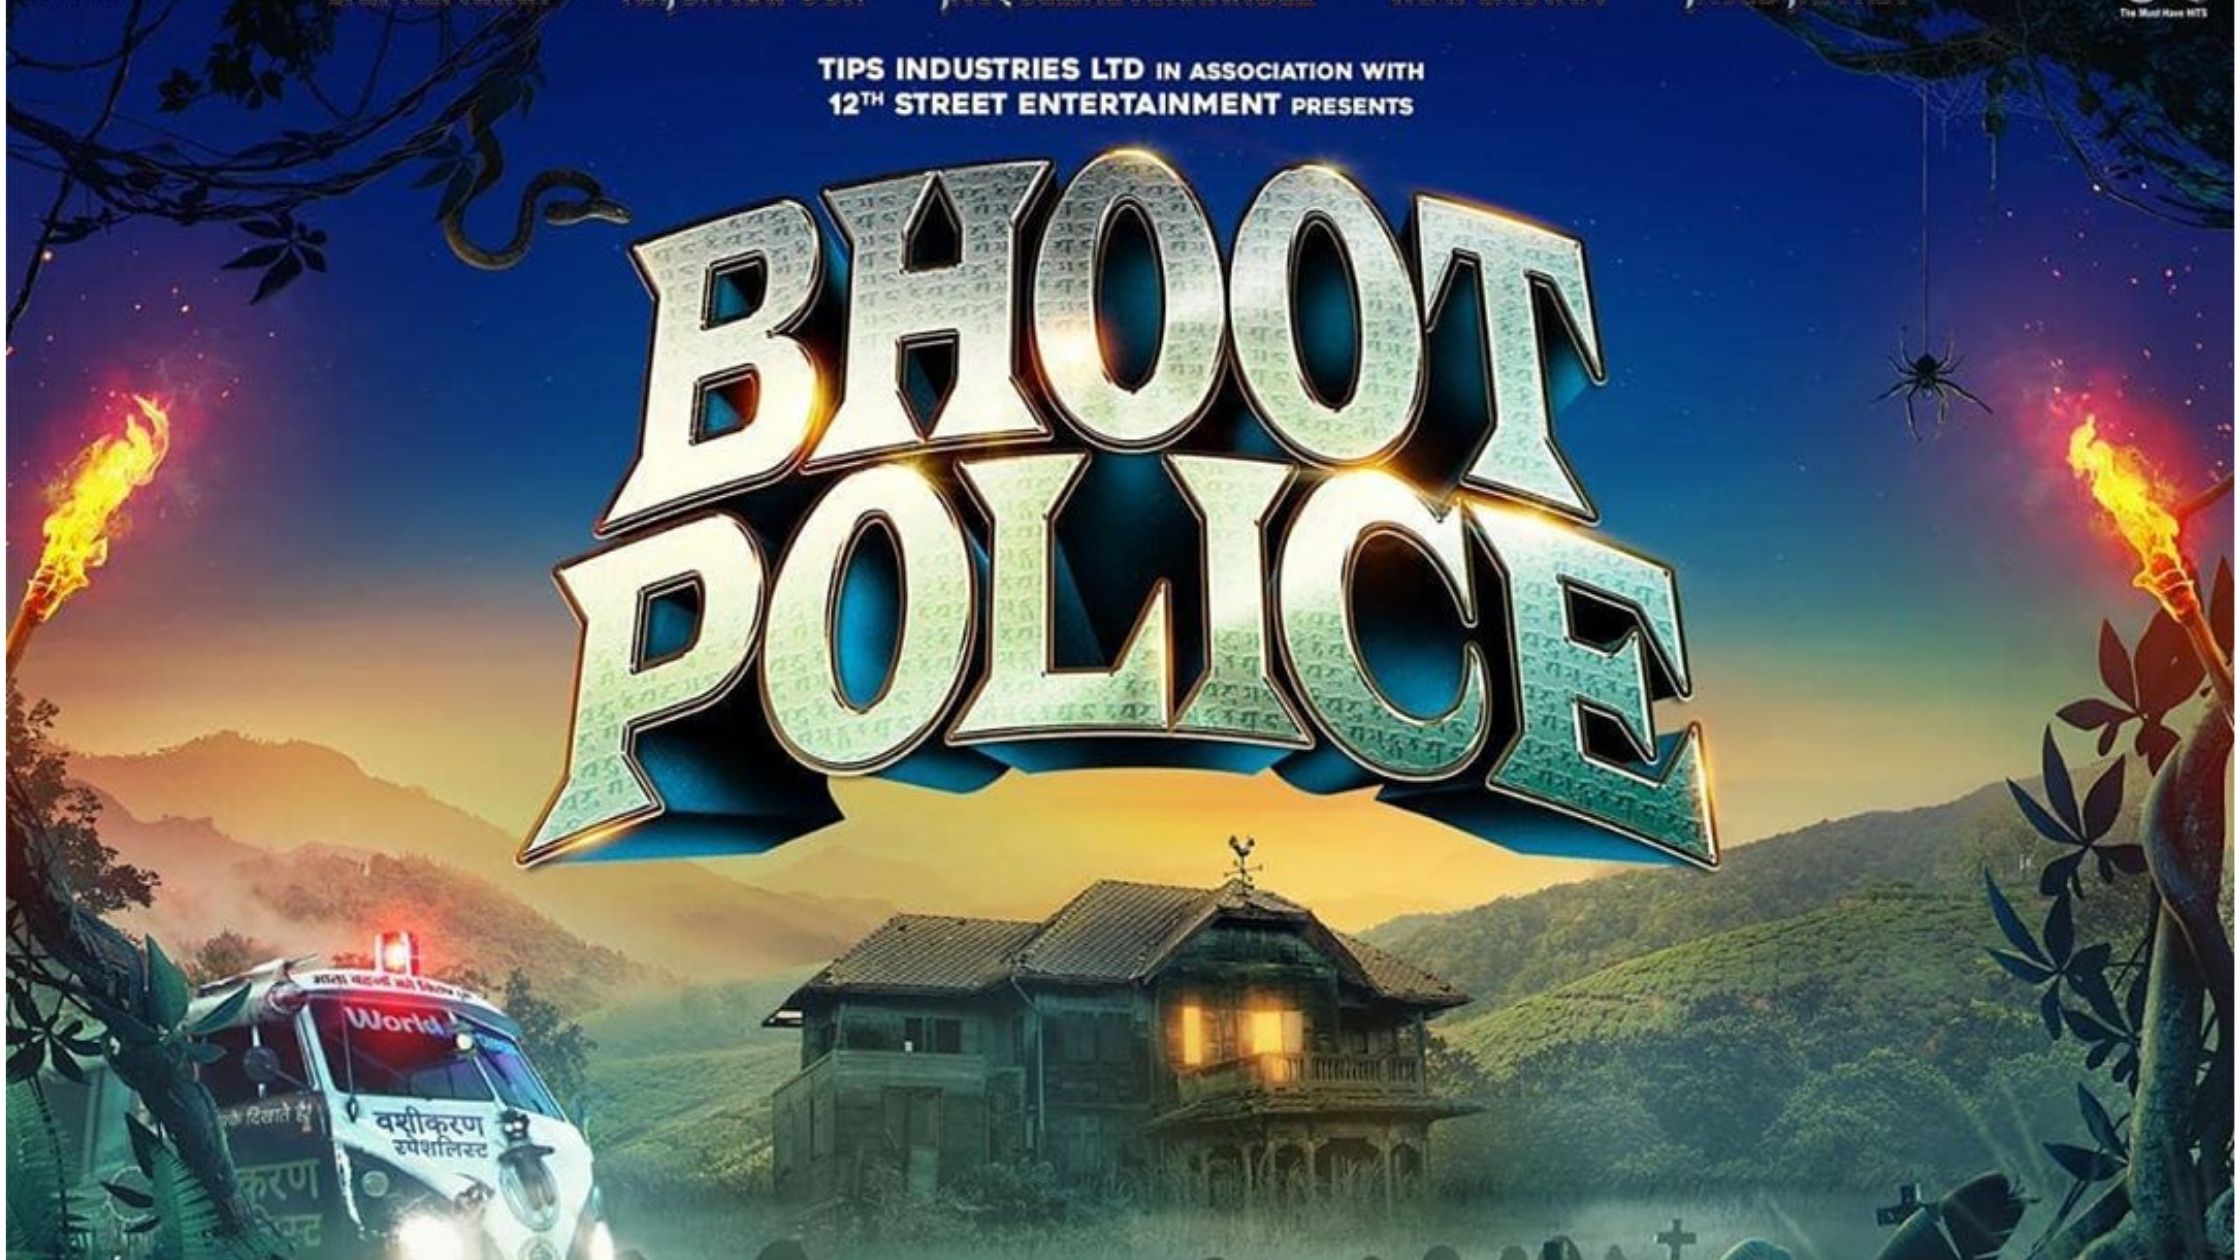 BhOOT POLICE poster